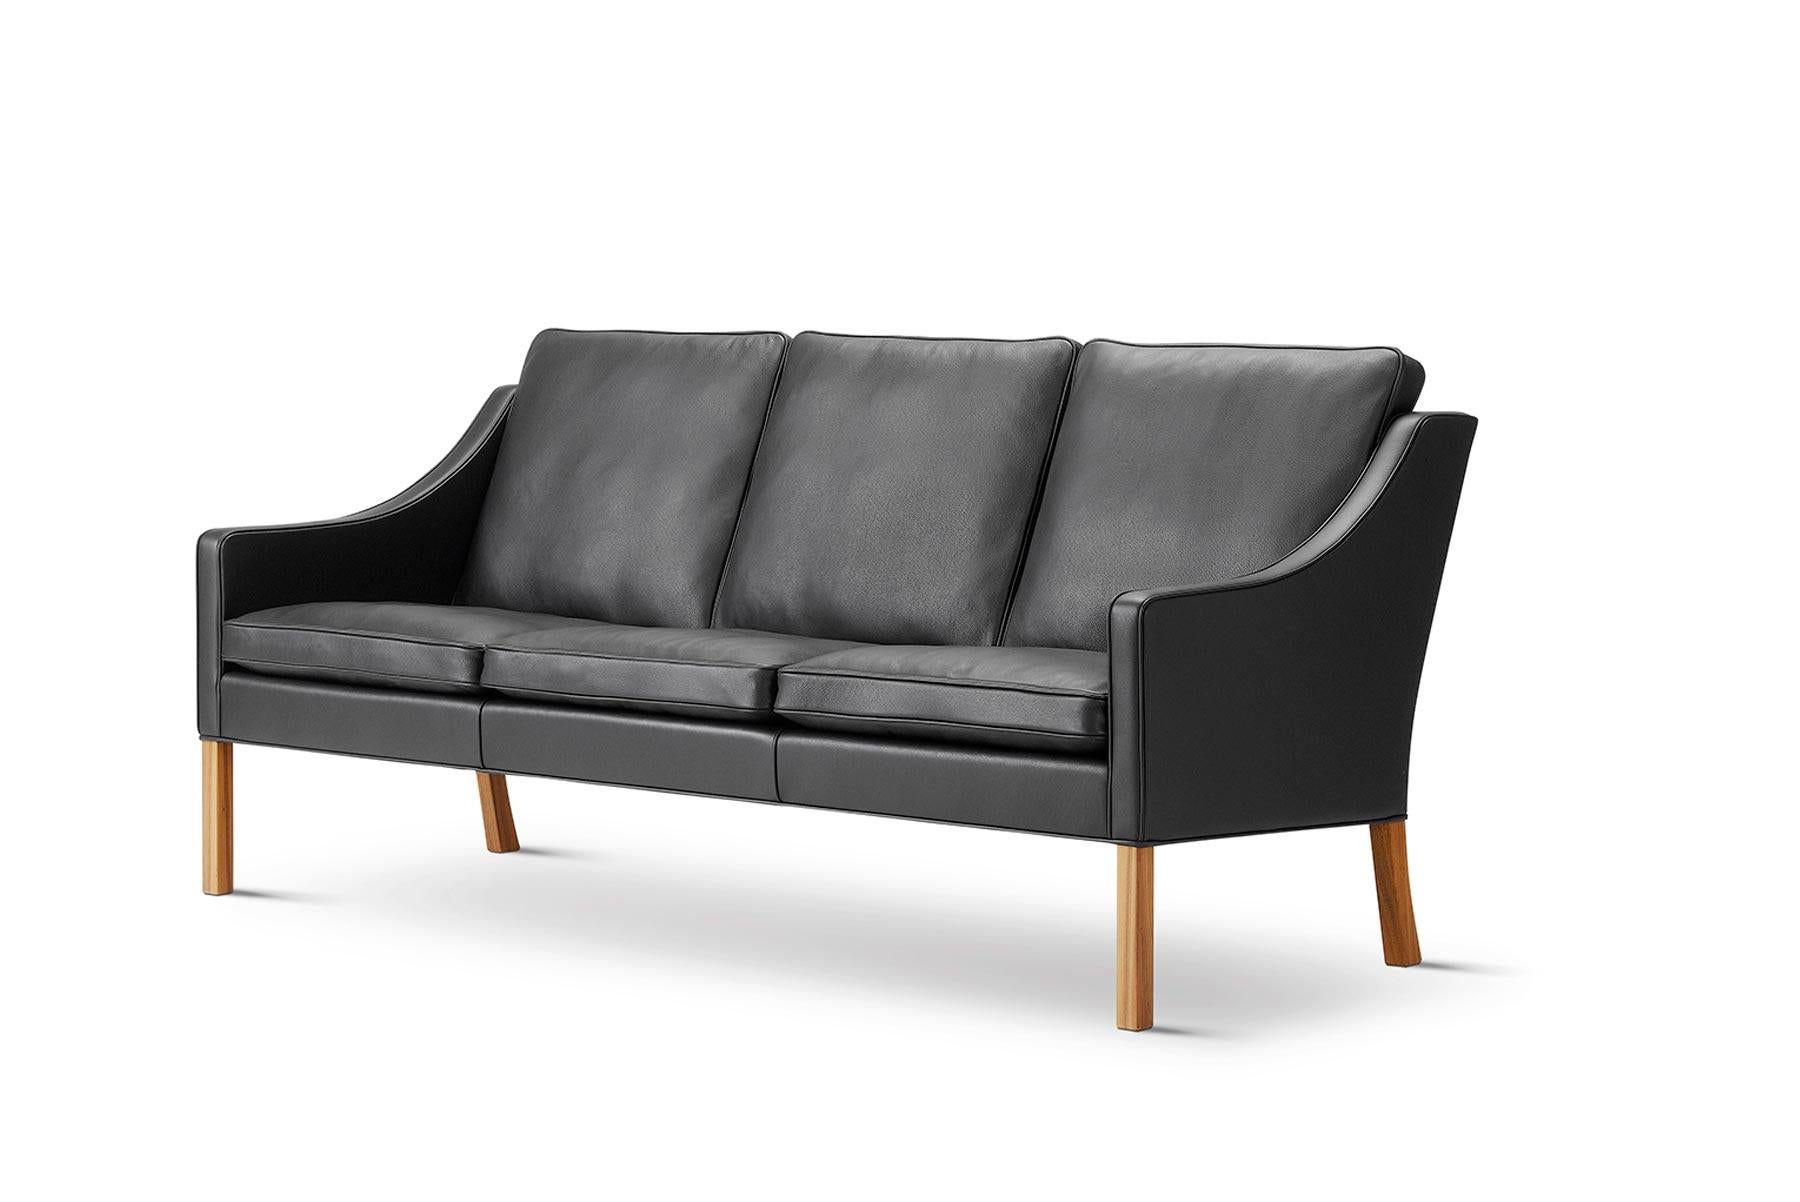 The 2209 three seater sofa features an elegantly curved lowered back and was designed by Børge Mogensen in 1963.